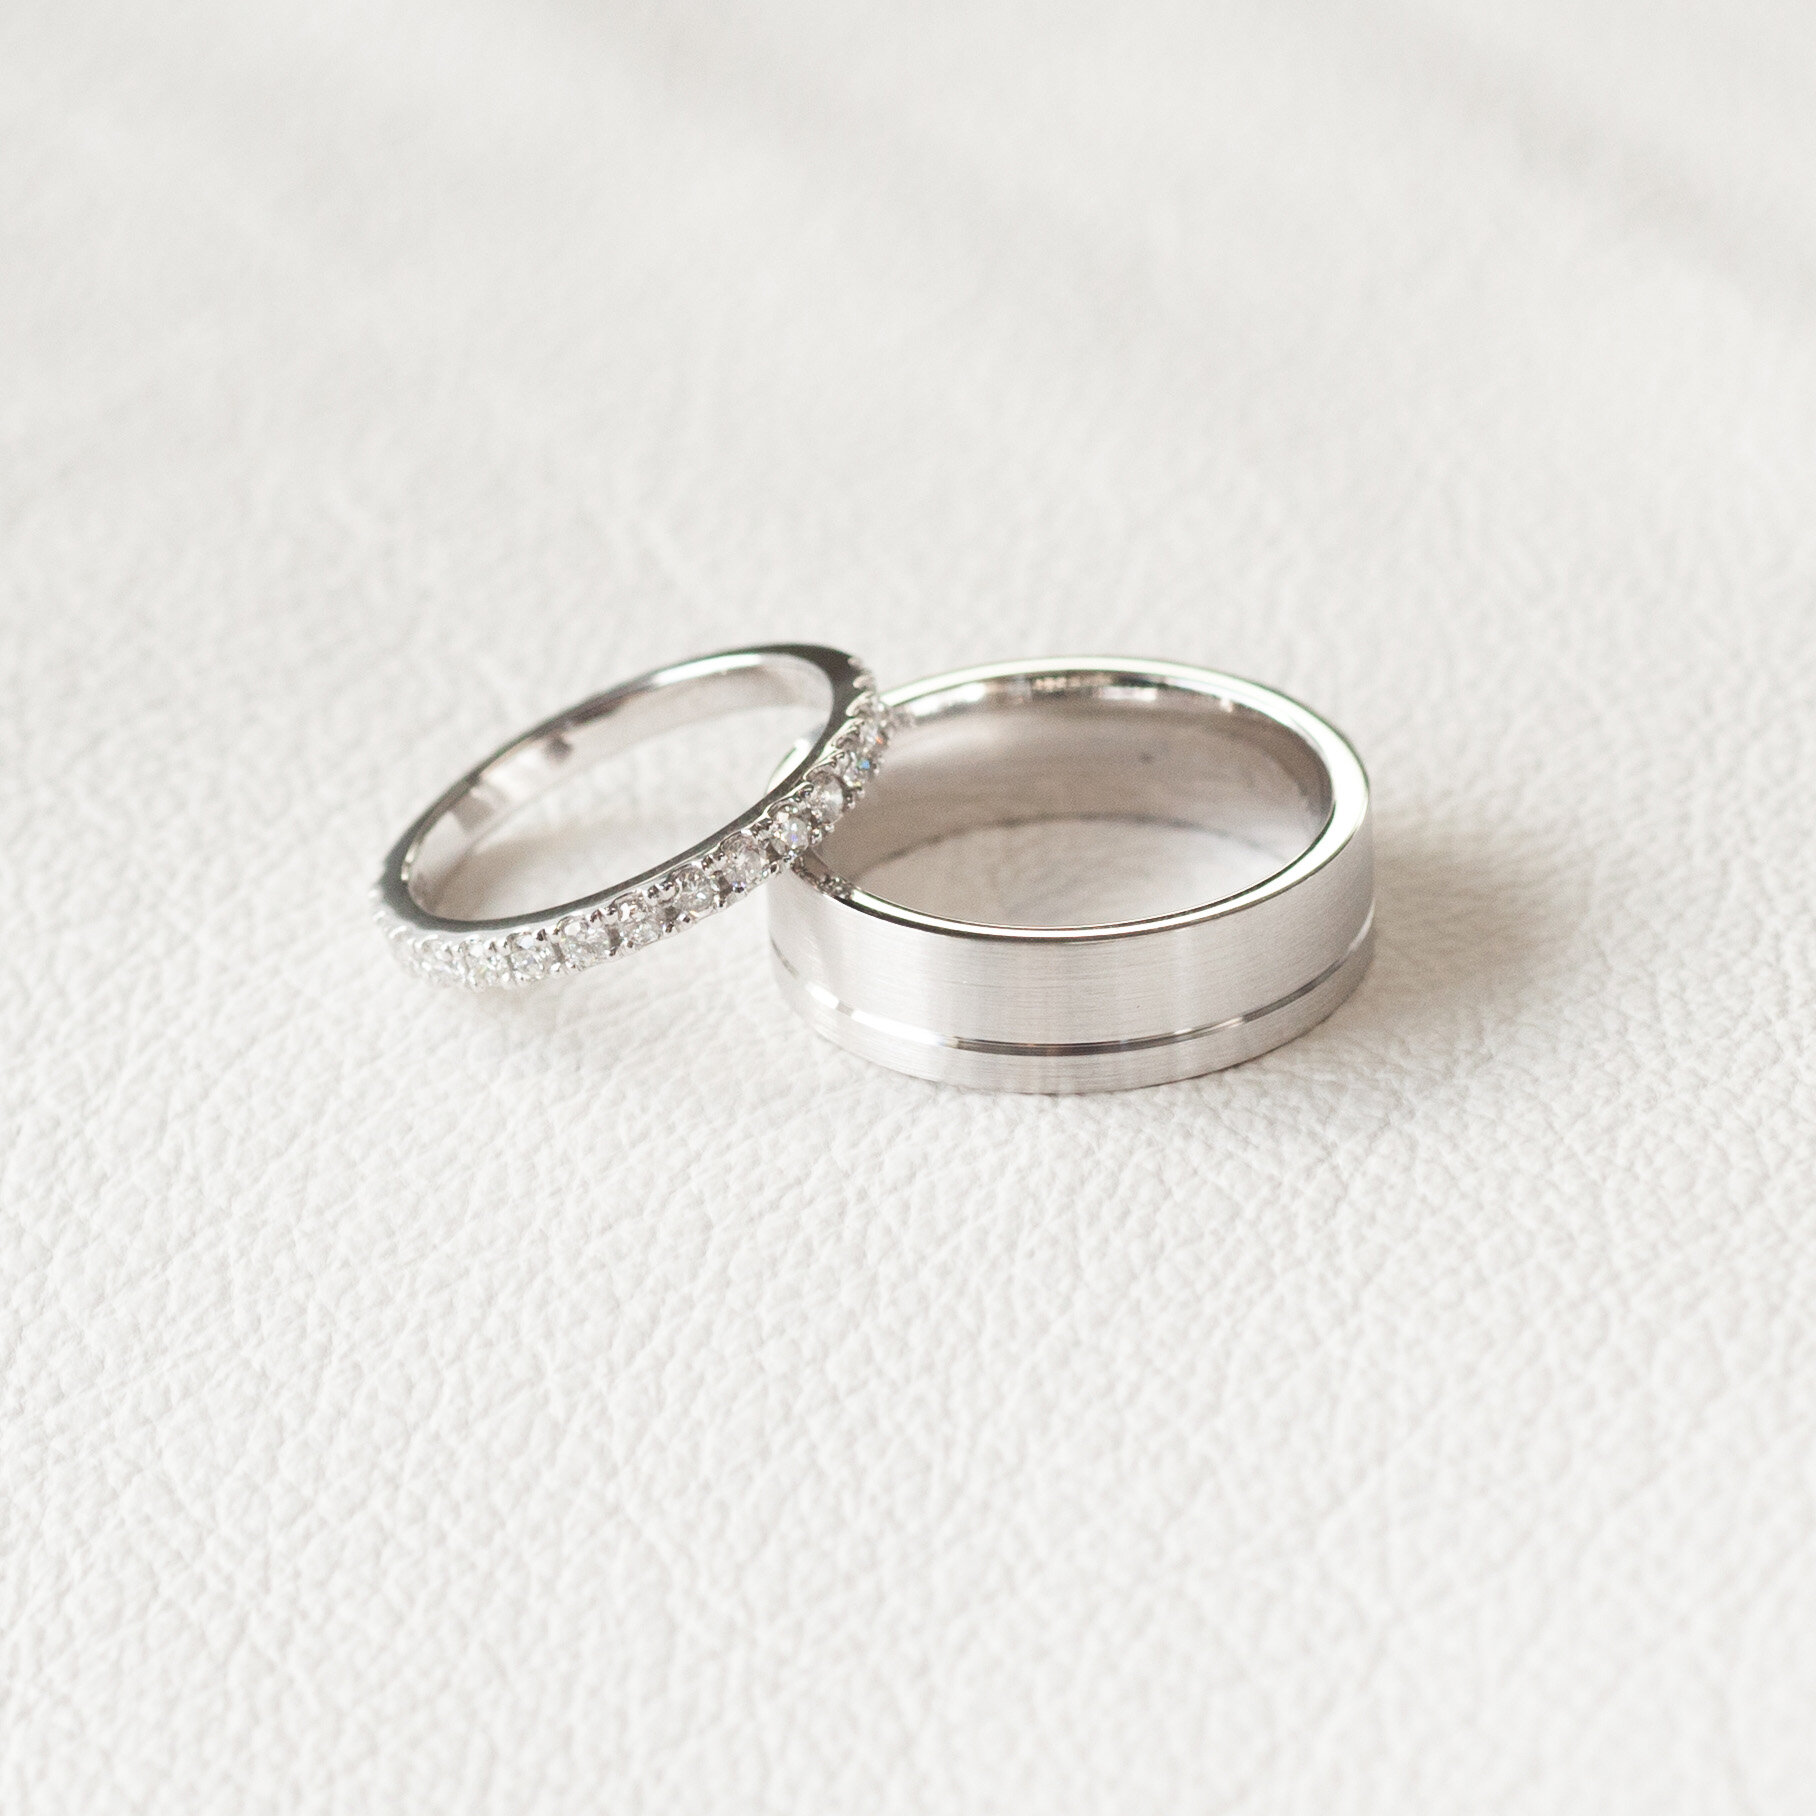 his-and-hers-wedding-bands.jpg